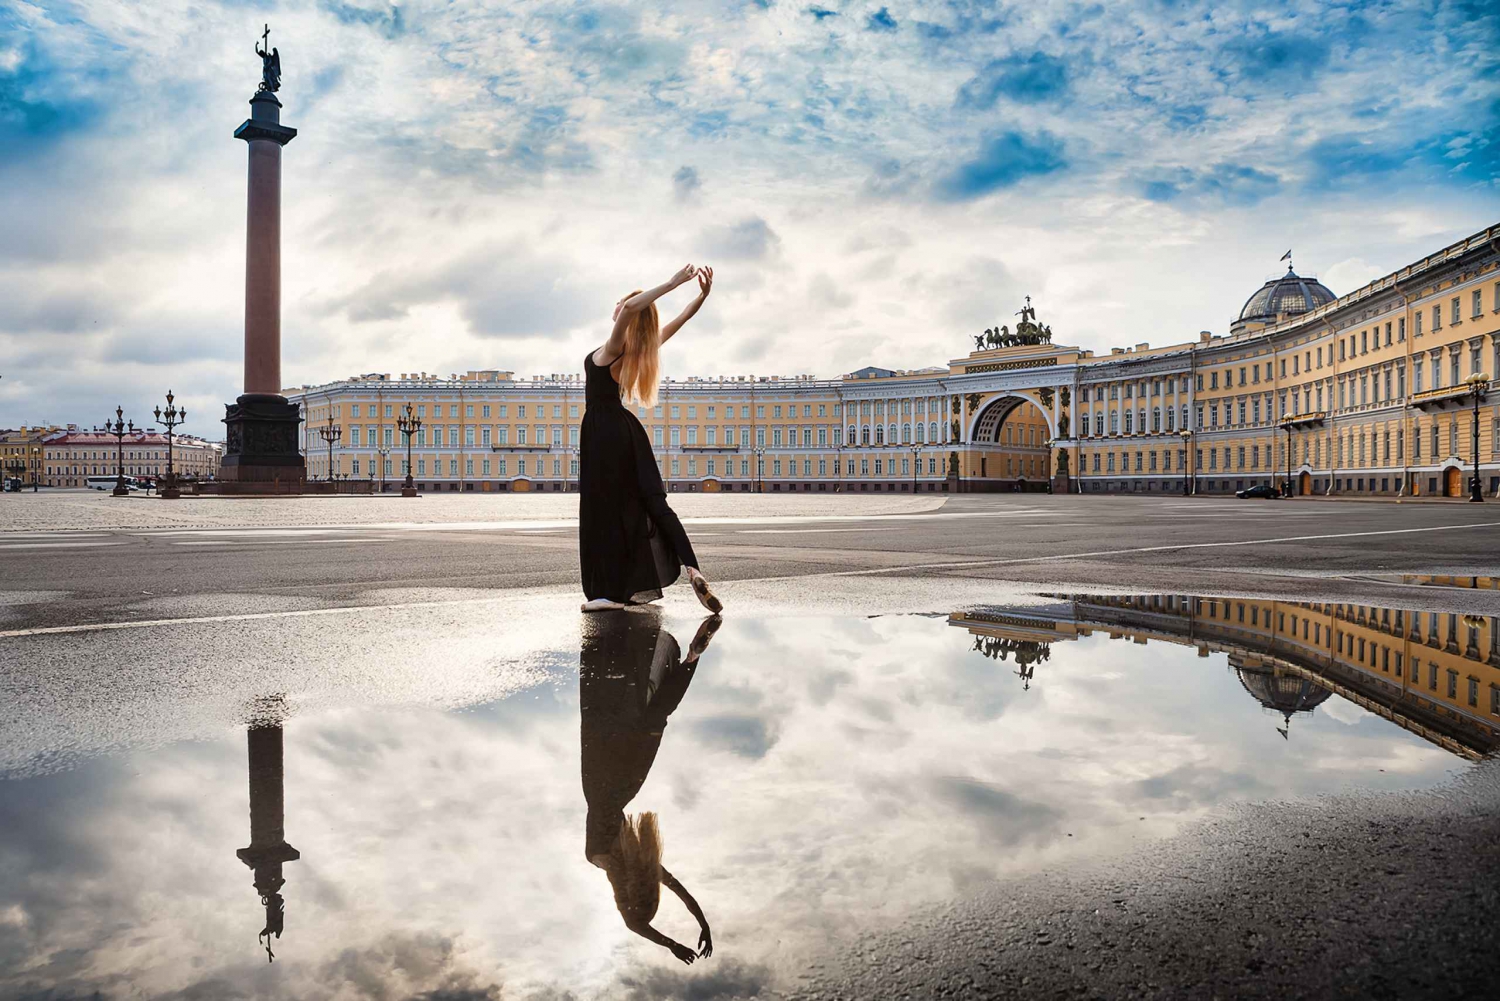 Flexible Day Tour in St. Petersburg with Guide & Driver